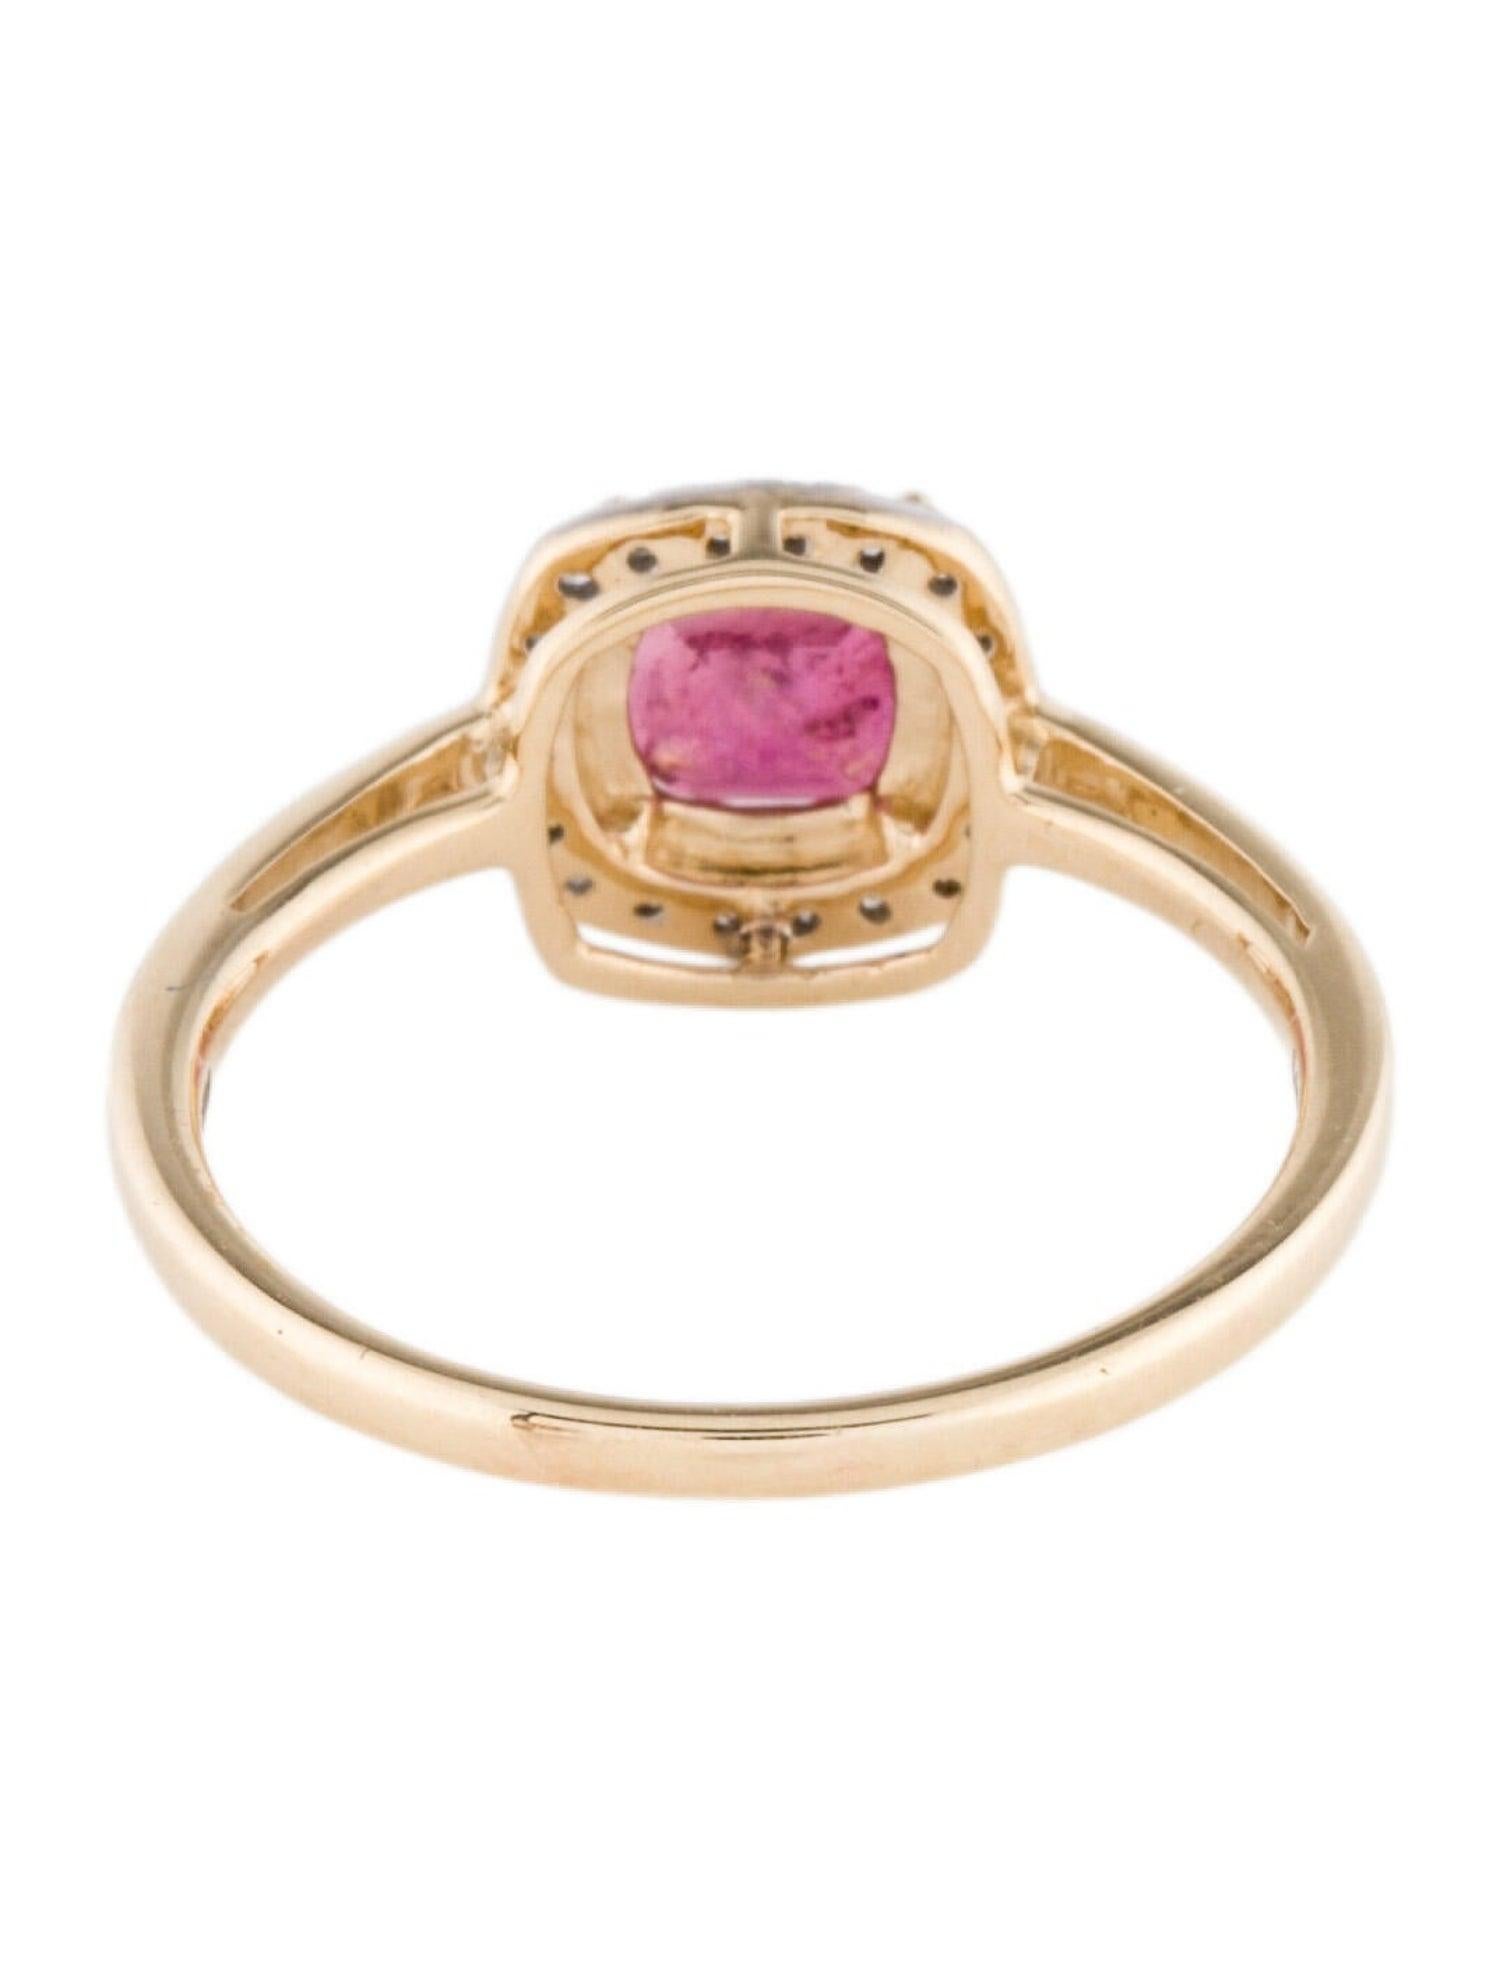 Rose Cut Exquisite 14K Tourmaline & Diamond Cocktail Ring - Size 6.75 - Timeless Luxury For Sale